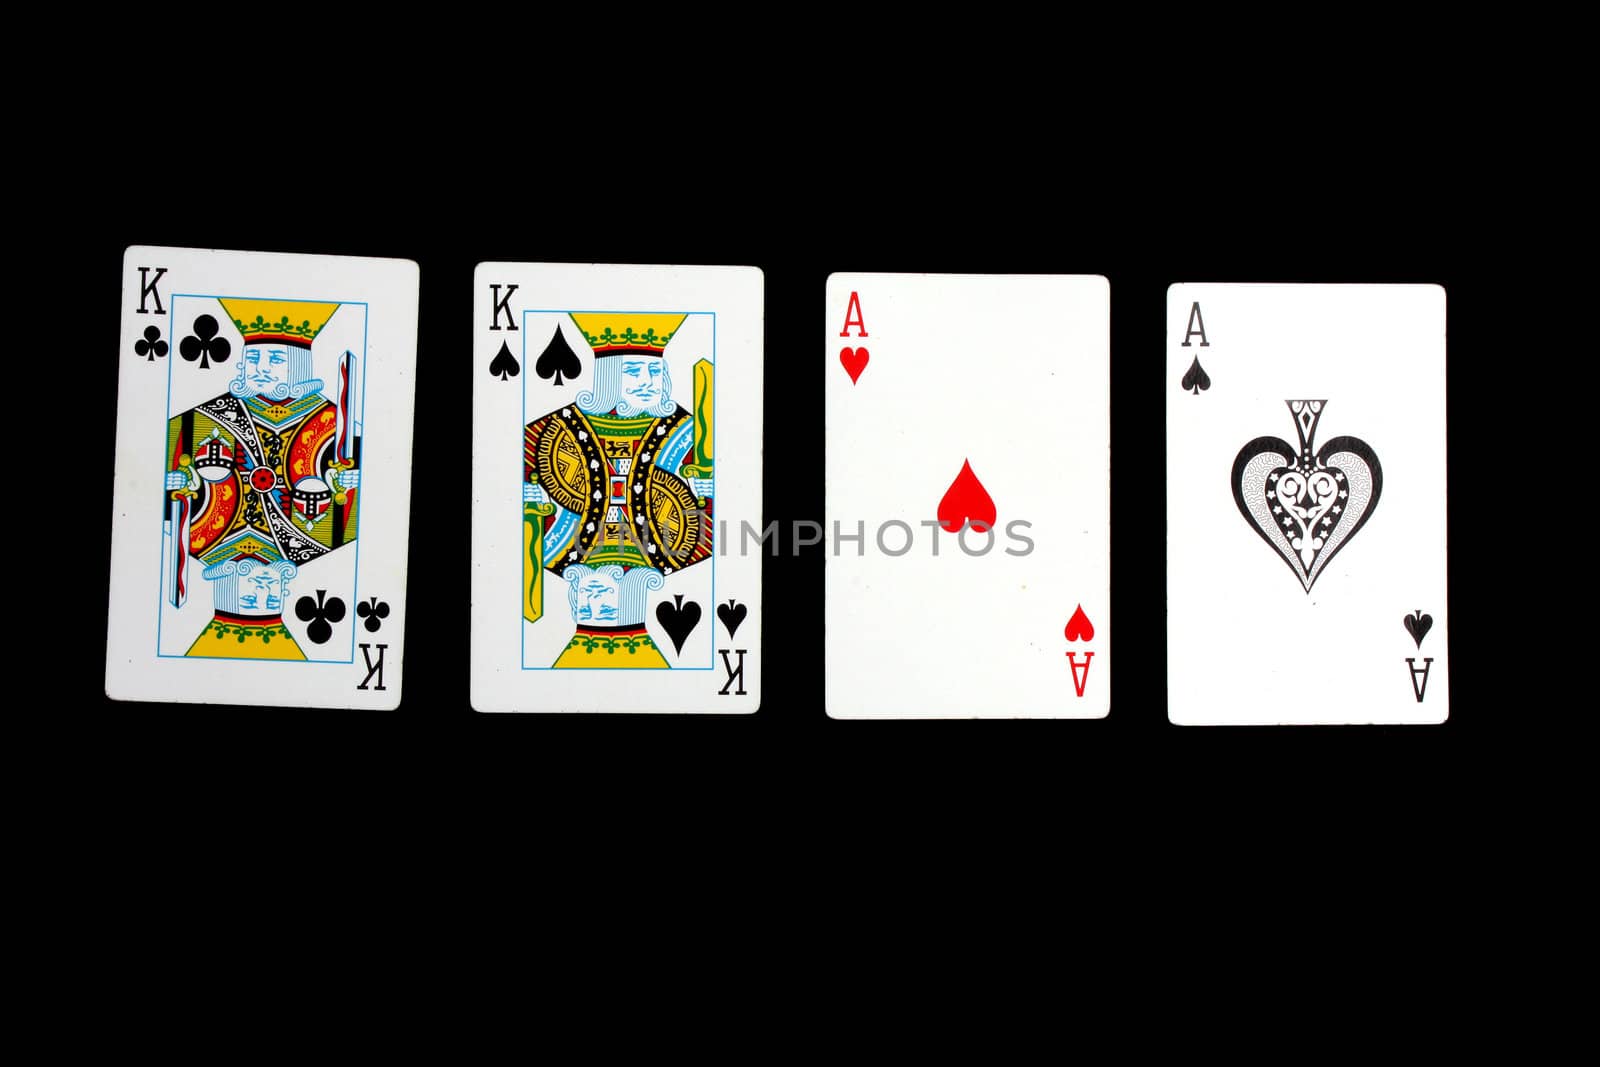 A poker hand of two pairs, consisting of a pair of kings and aces, on black background.